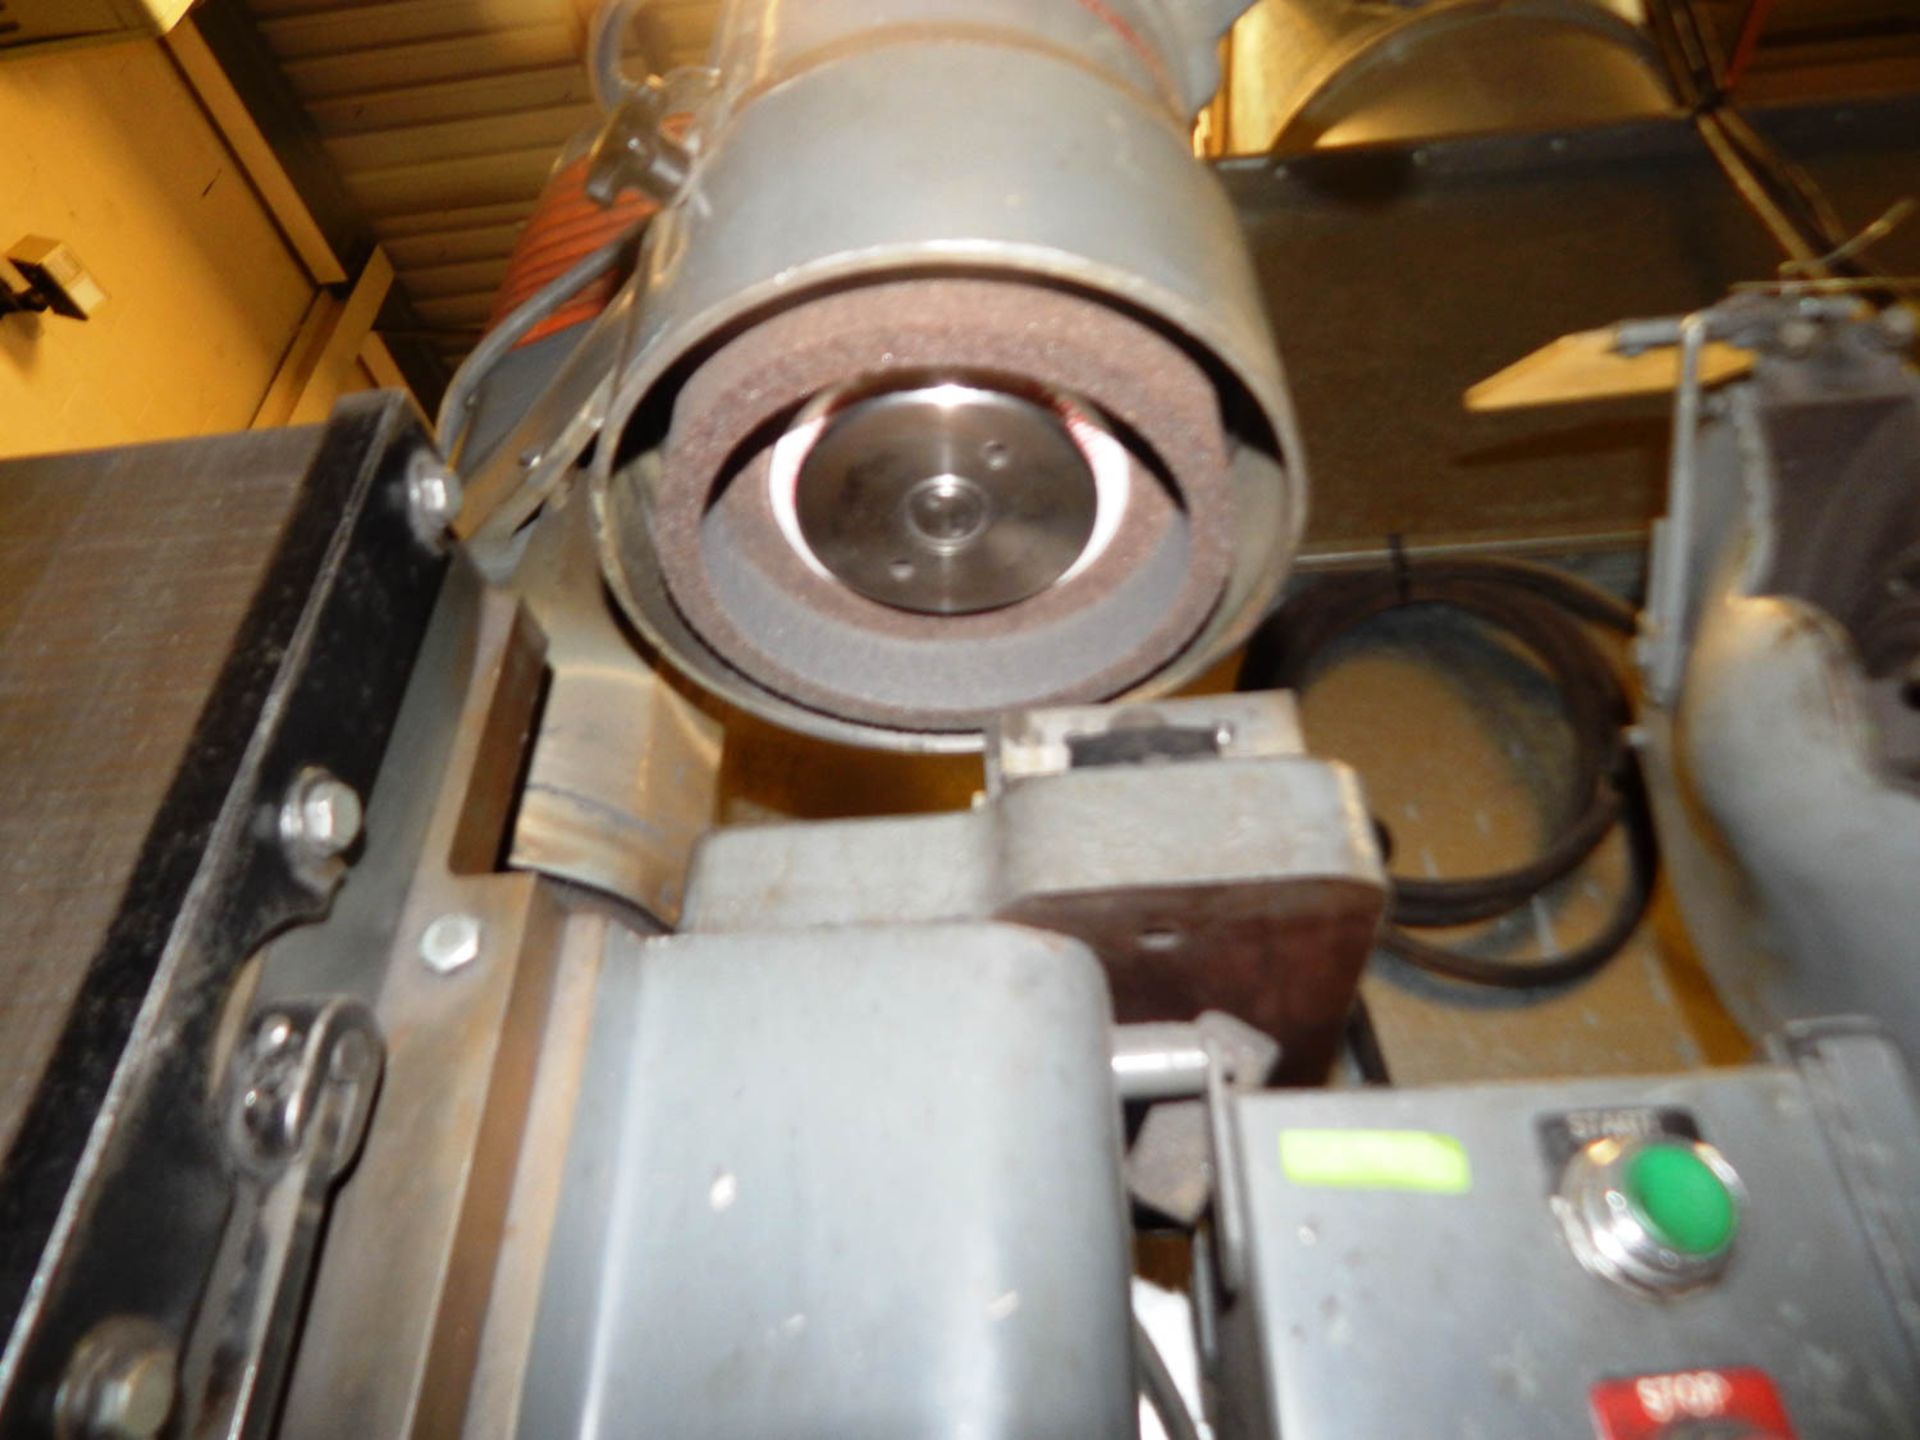 MEDINA END GRINDER MDL B BY PHINNEY TOOL & DIE CO, WITH 8'' X 15'' CERAMAX MAGNETIC CHUCK & 8'' X - Image 2 of 2